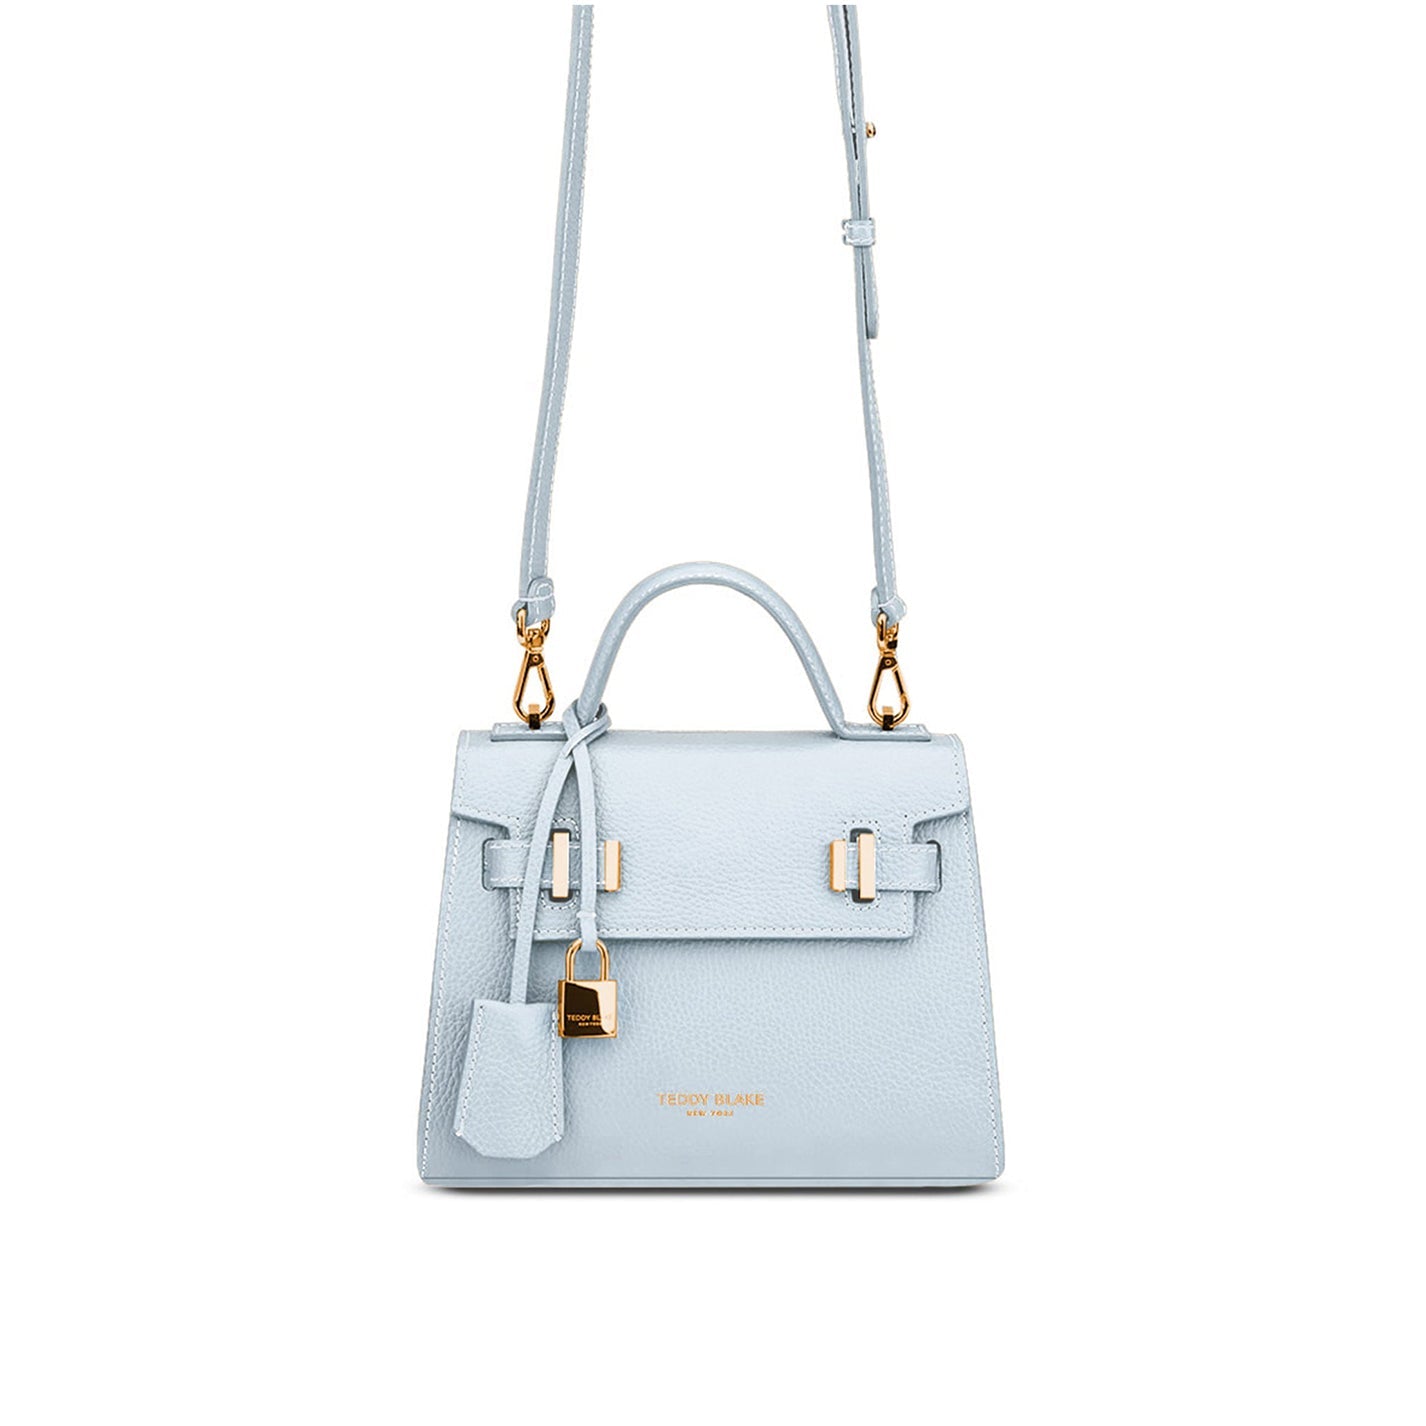 ava-gold-9-light-blue-leather-bag-with-handle